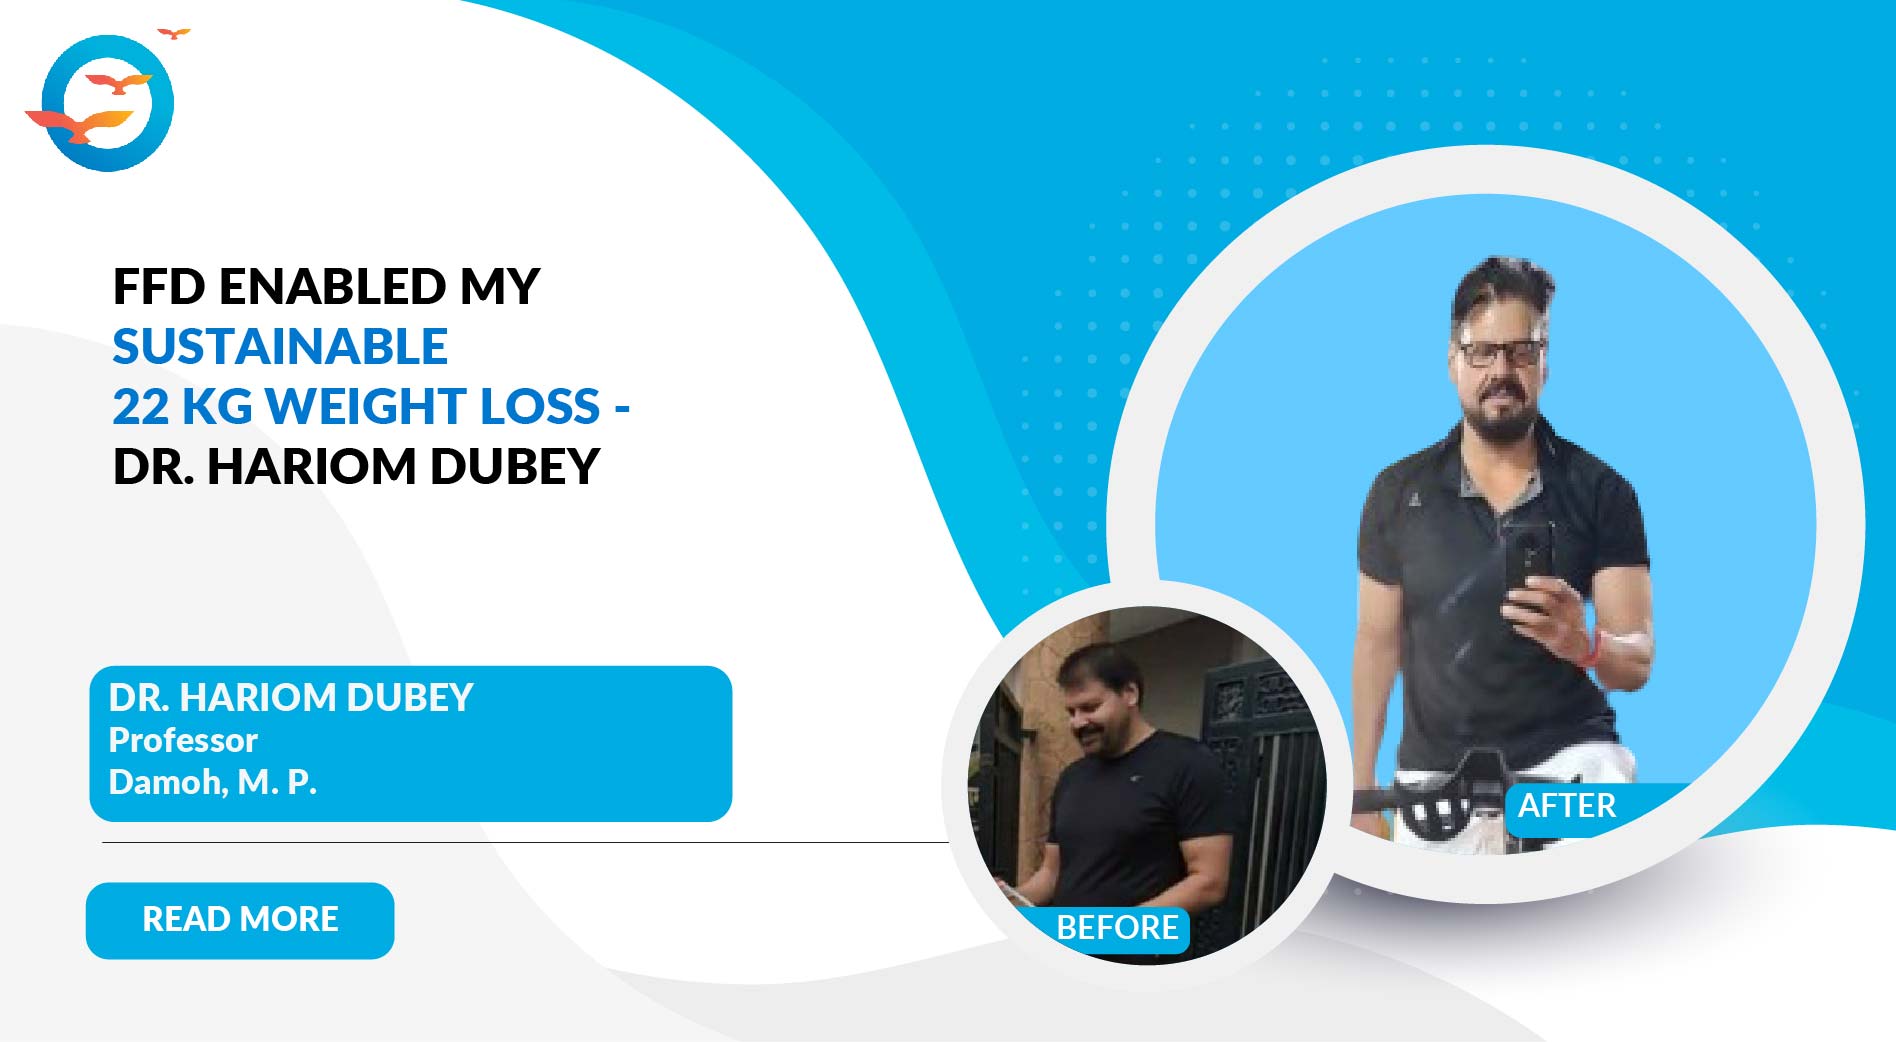 How I Lost 22 kg With FFD's Help